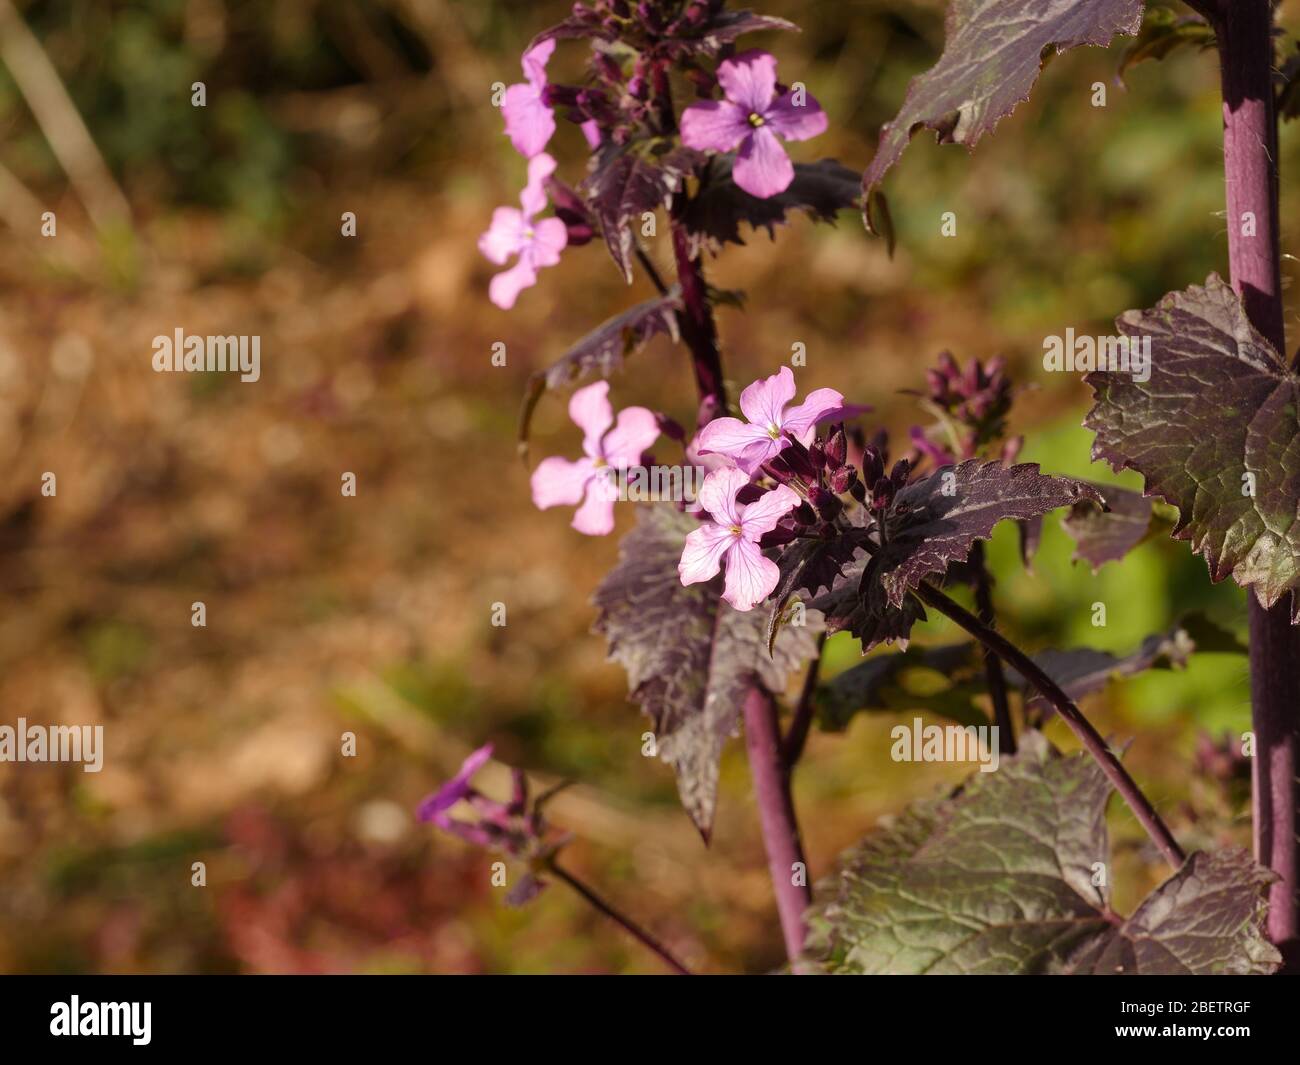 Honesty, Chedglow,  Lunaria annua, mottled purple leaves and purple flowers Stock Photo